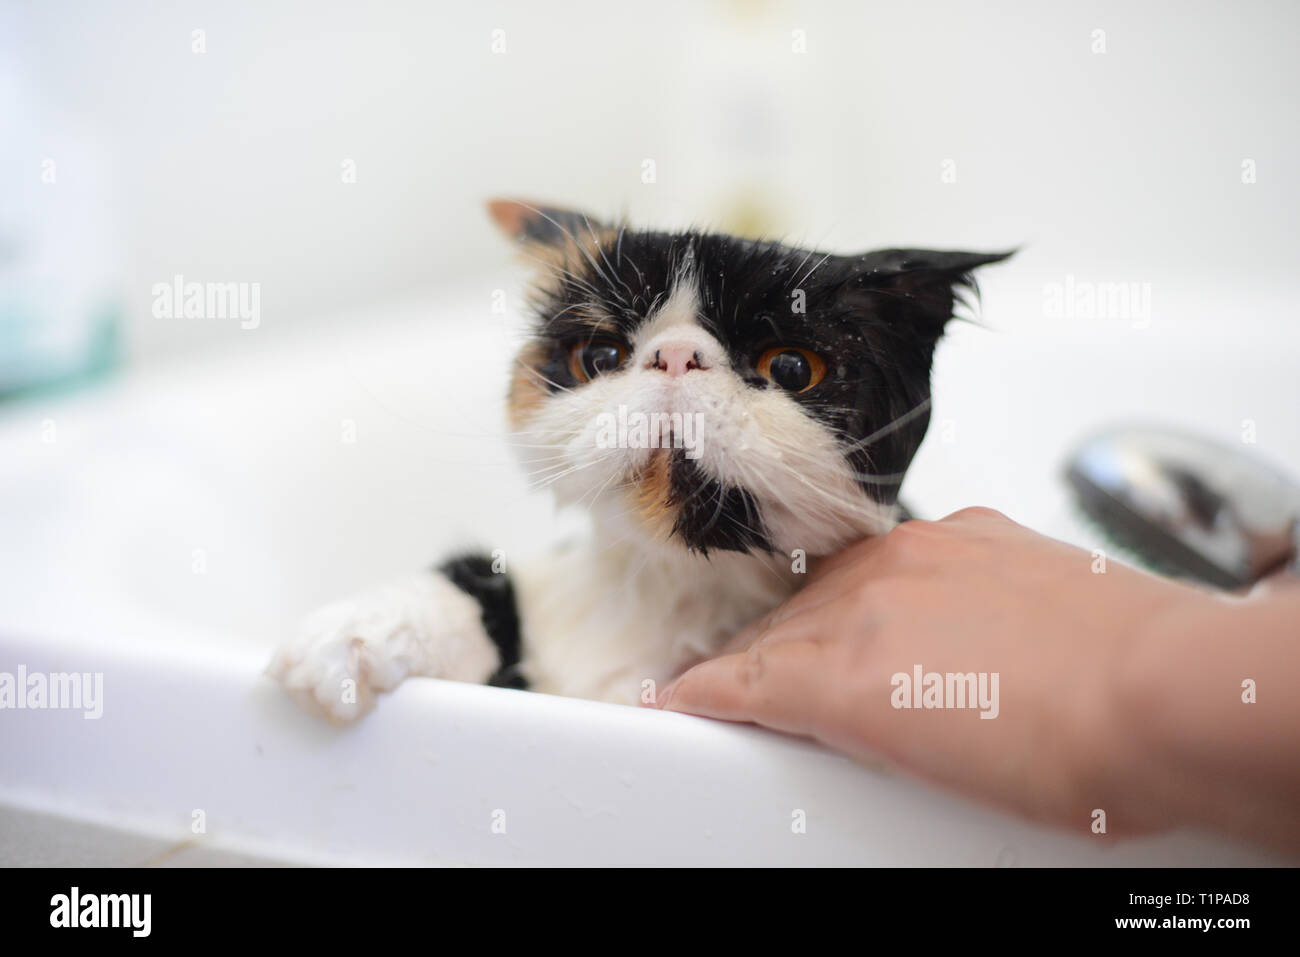 soffie the cat is a persian exotic, she is having a shower at home Stock Photo